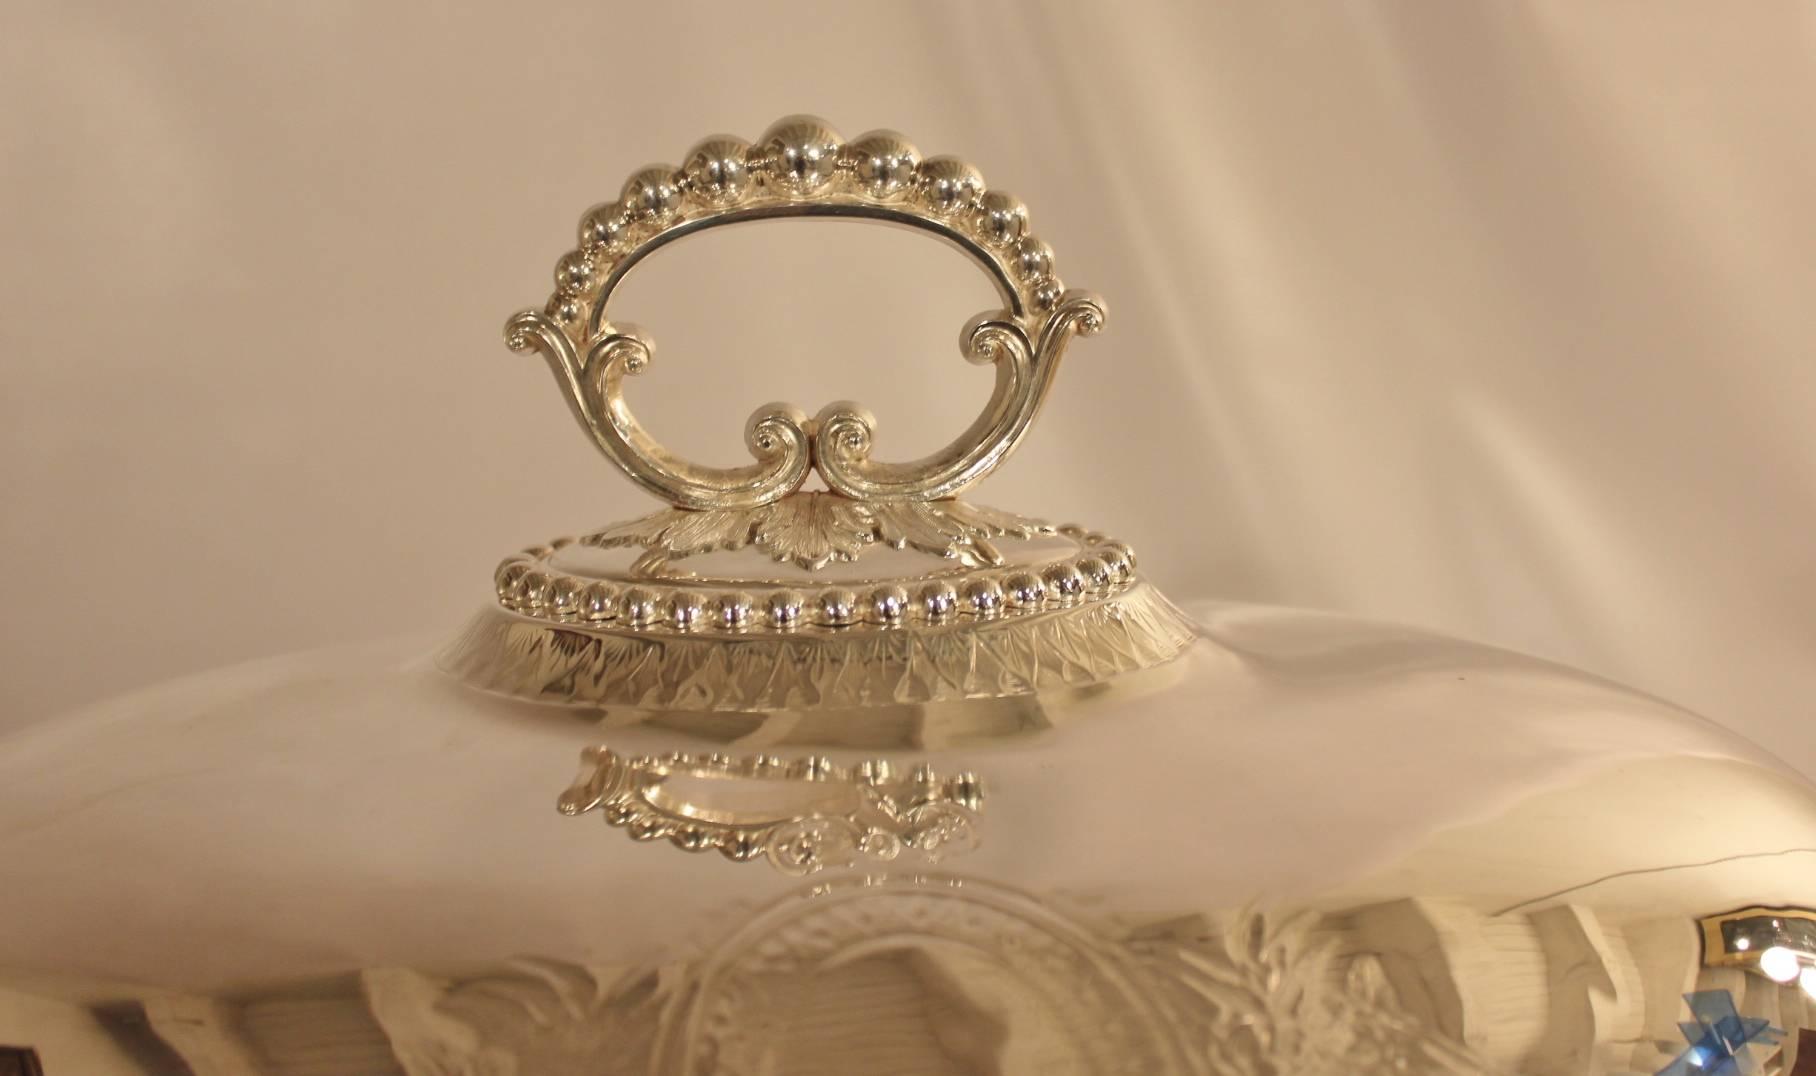 Handsome and large silver plate meat - entree dome. English made with full set of hall marks. The beaded handle sits atop the generous dome with elegant neoclassic Greek key detail. There is a beautiful medallion design on each side that has not